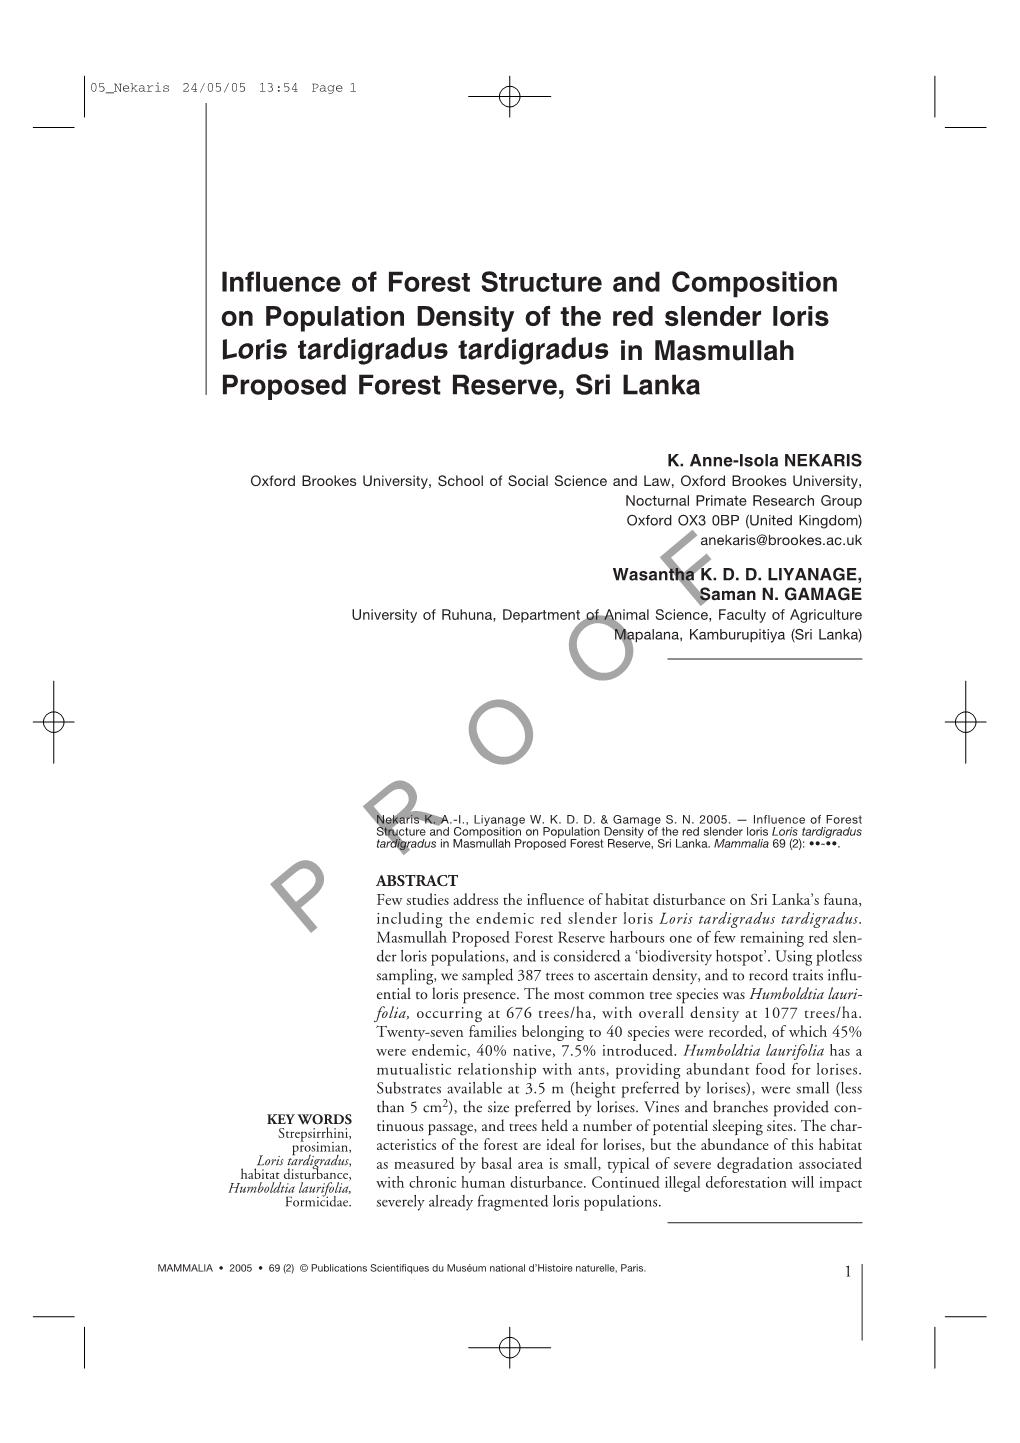 Relationship Between Forest Structure